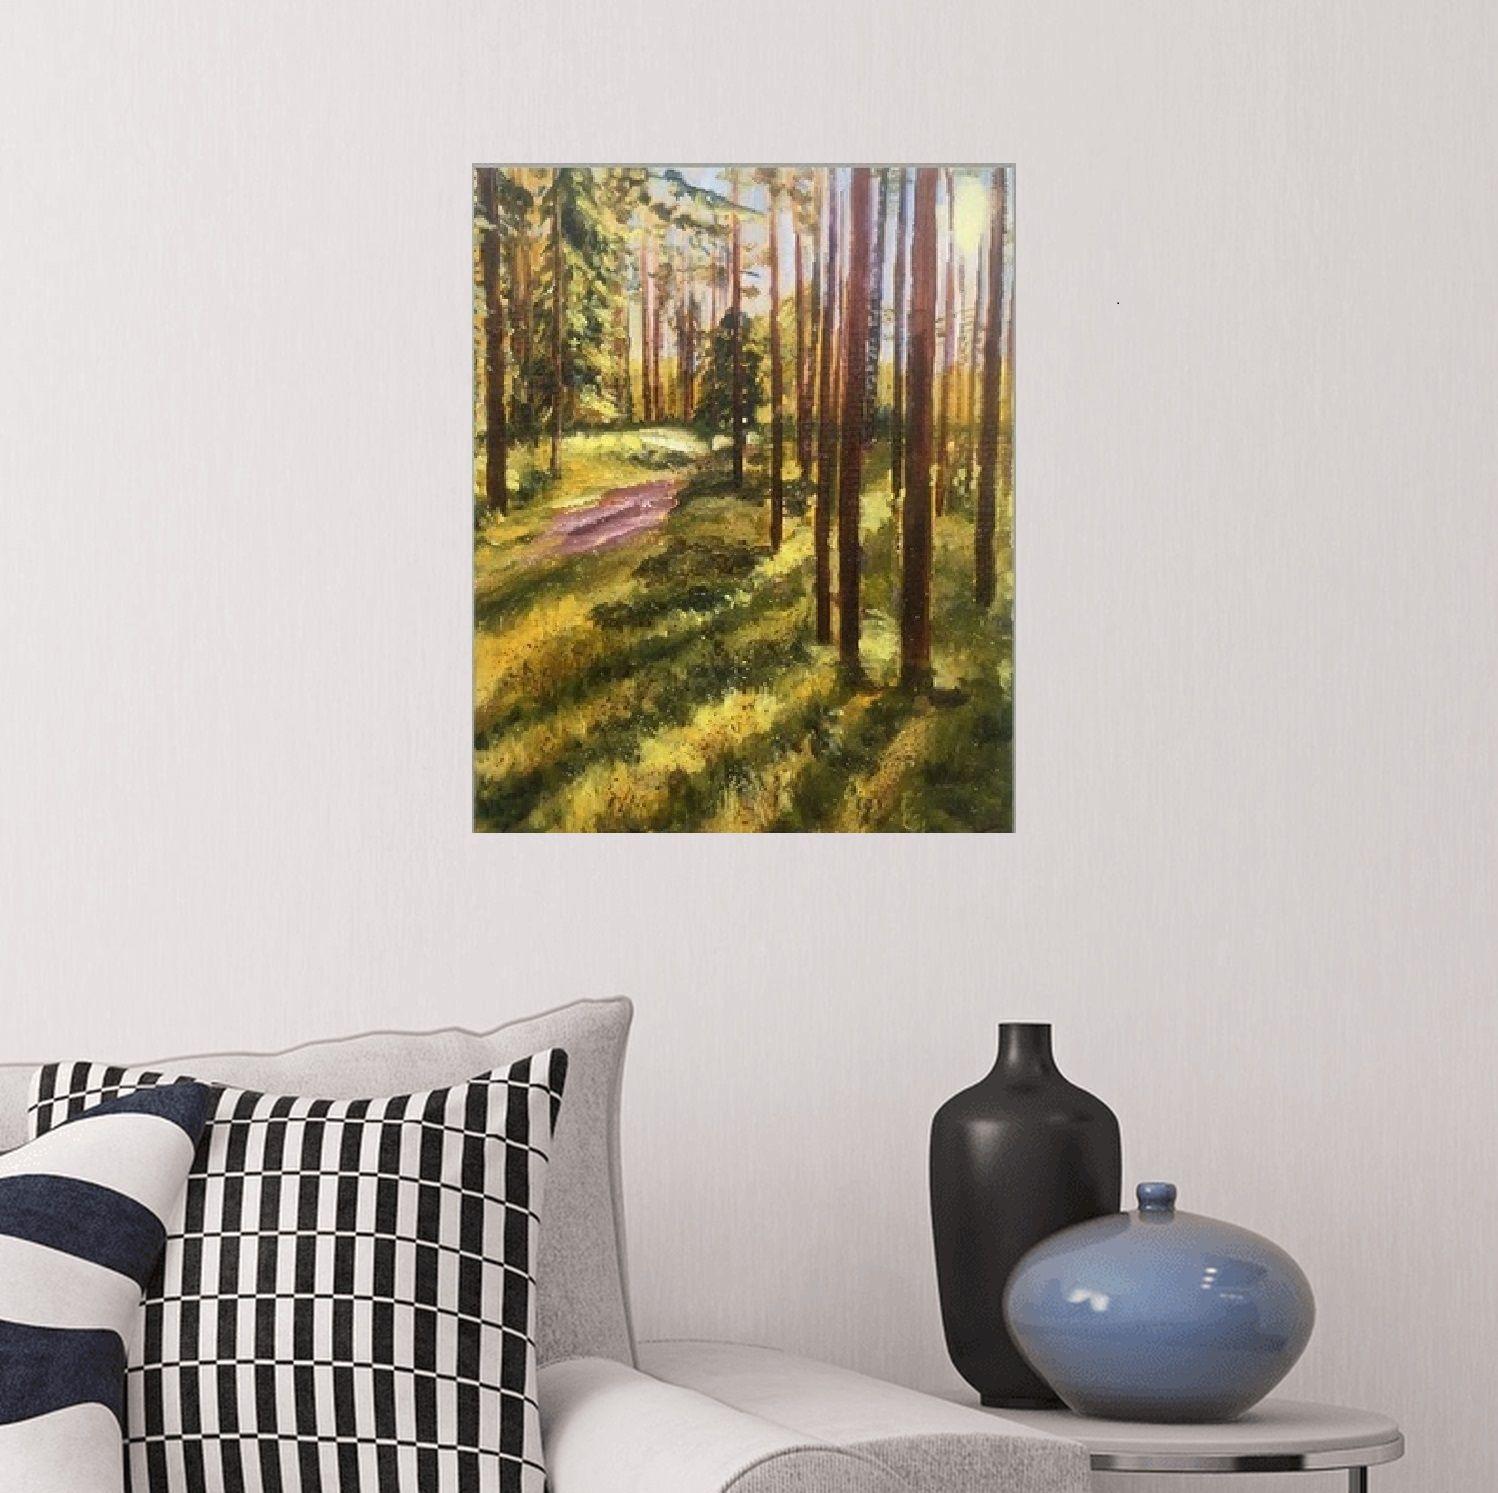 Landscape with pines forest. Studio painting done after the plain air in the location.  :: Painting :: Impressionist :: This piece comes with an official certificate of authenticity signed by the artist :: Ready to Hang: Yes :: Signed: Yes ::